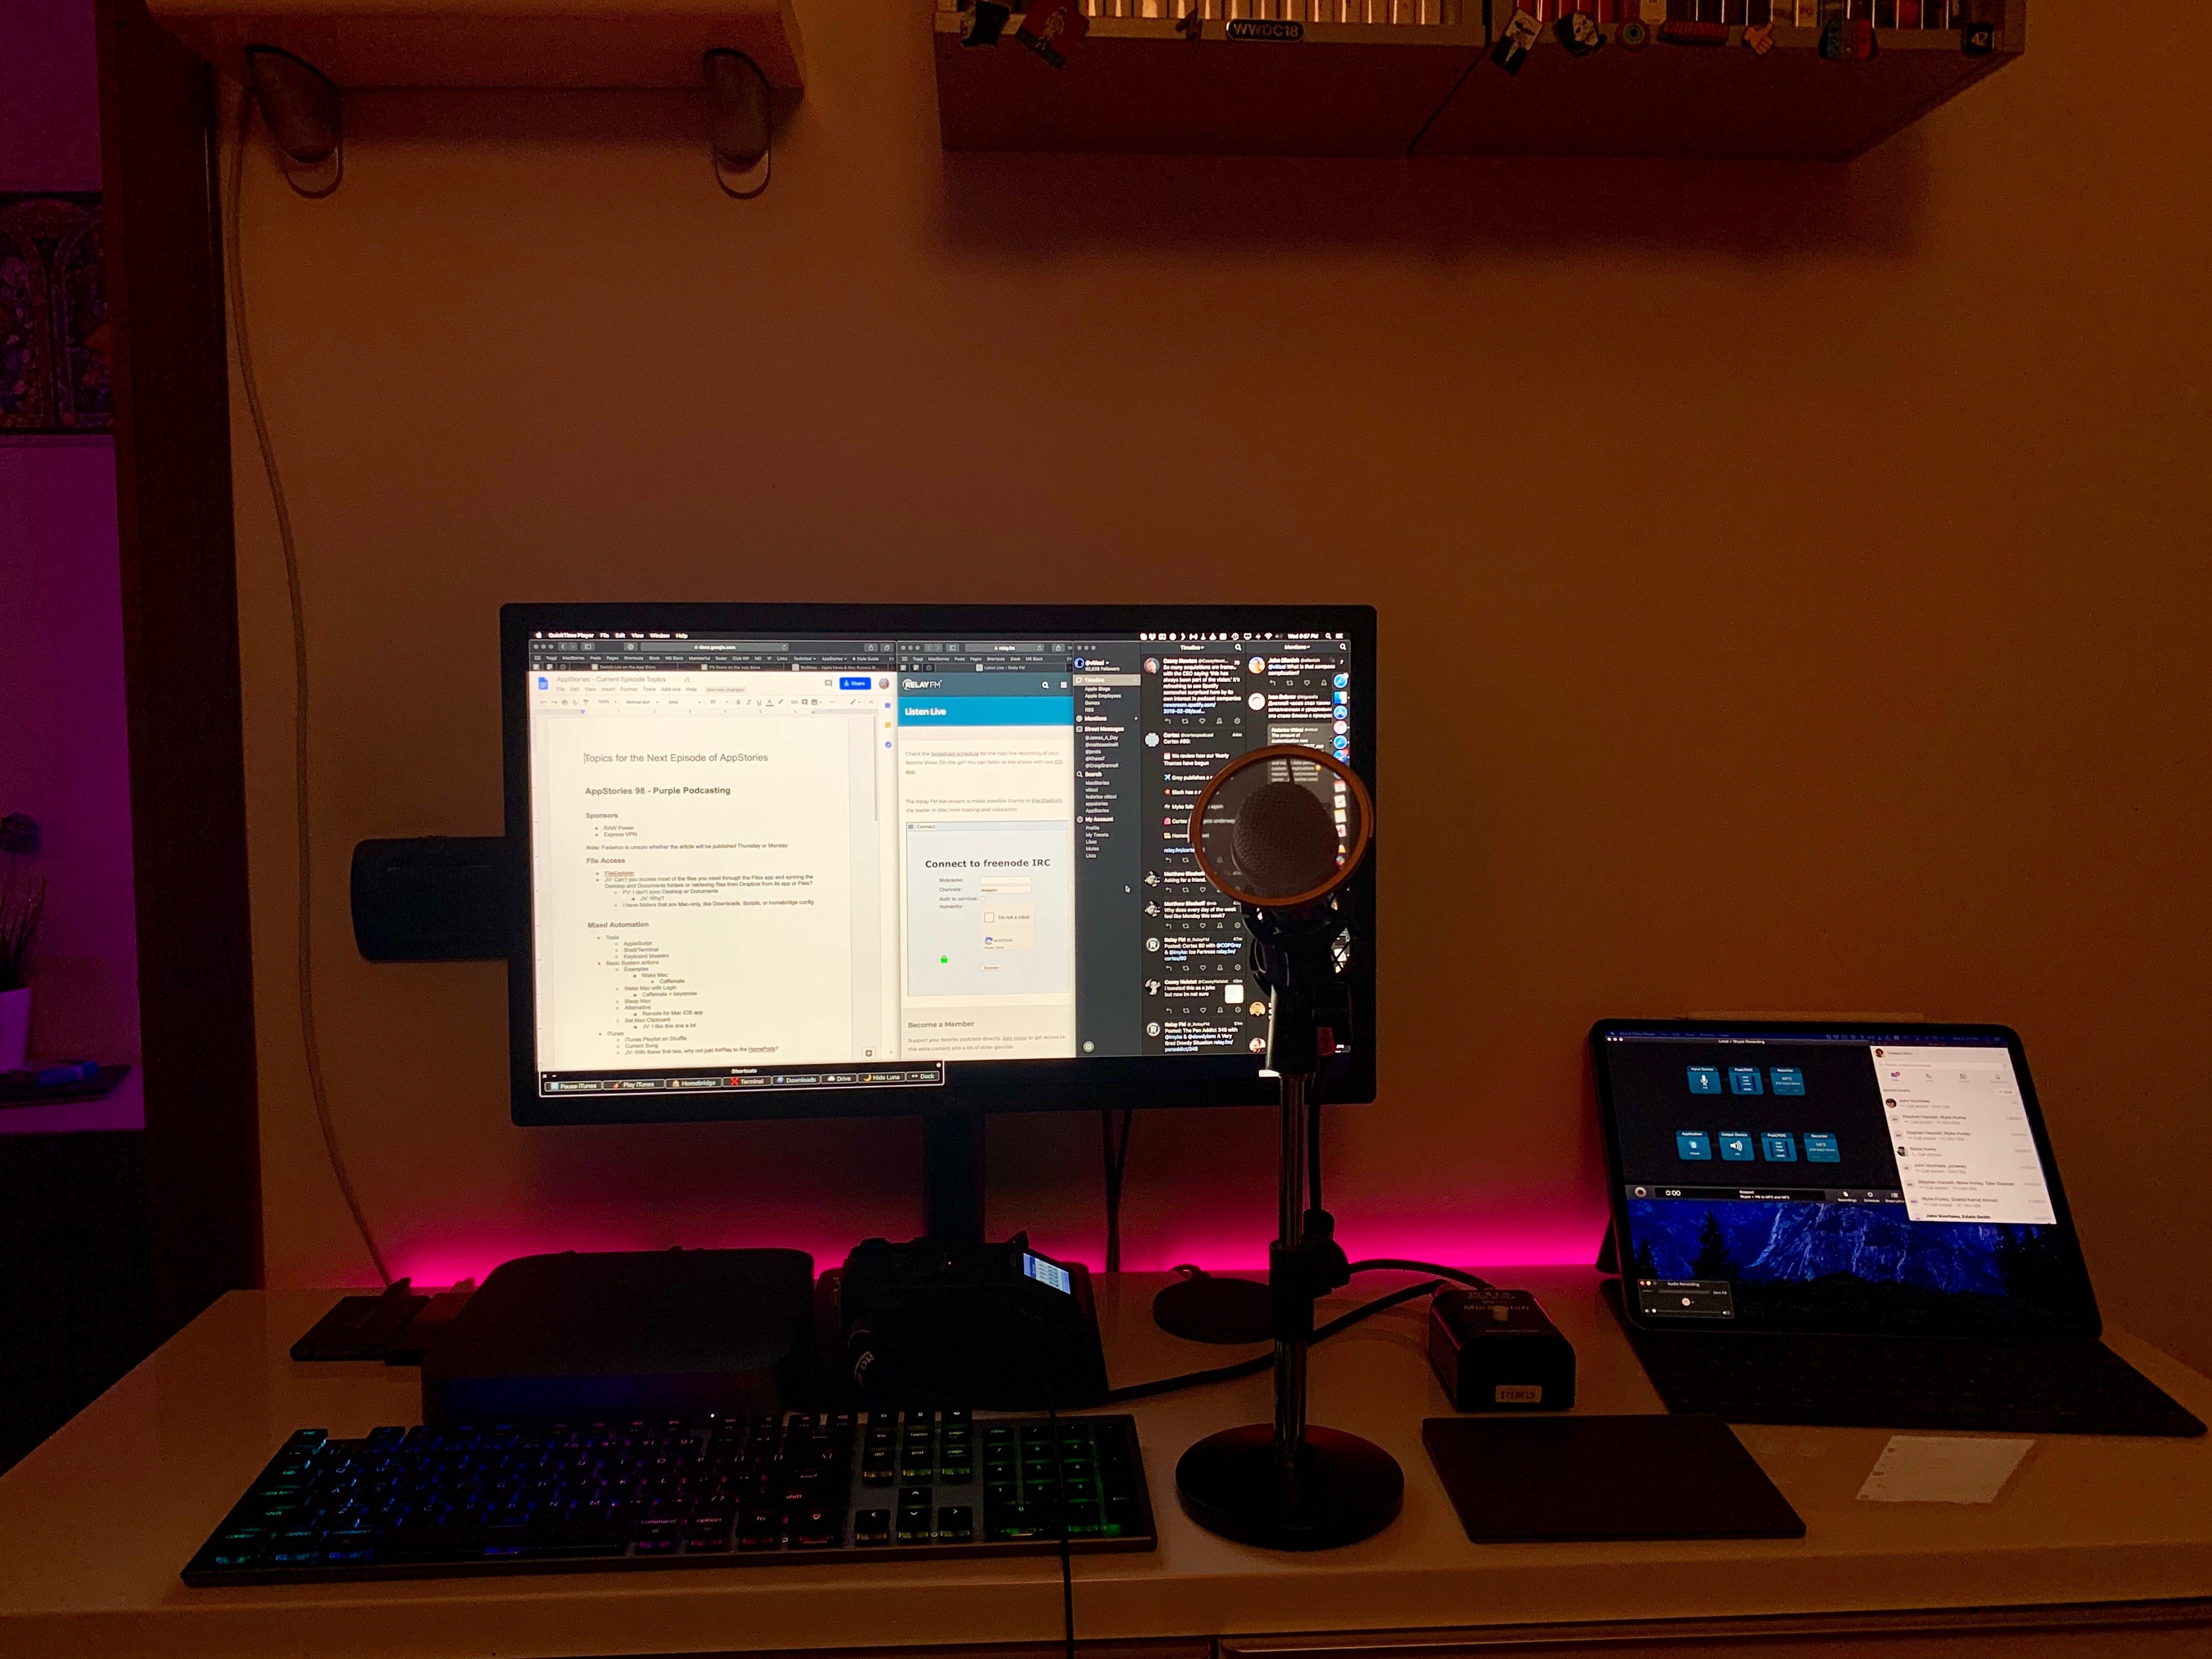 Lights dimmed, a shade of purple, and lots of app windows – this is how I like my podcasts.